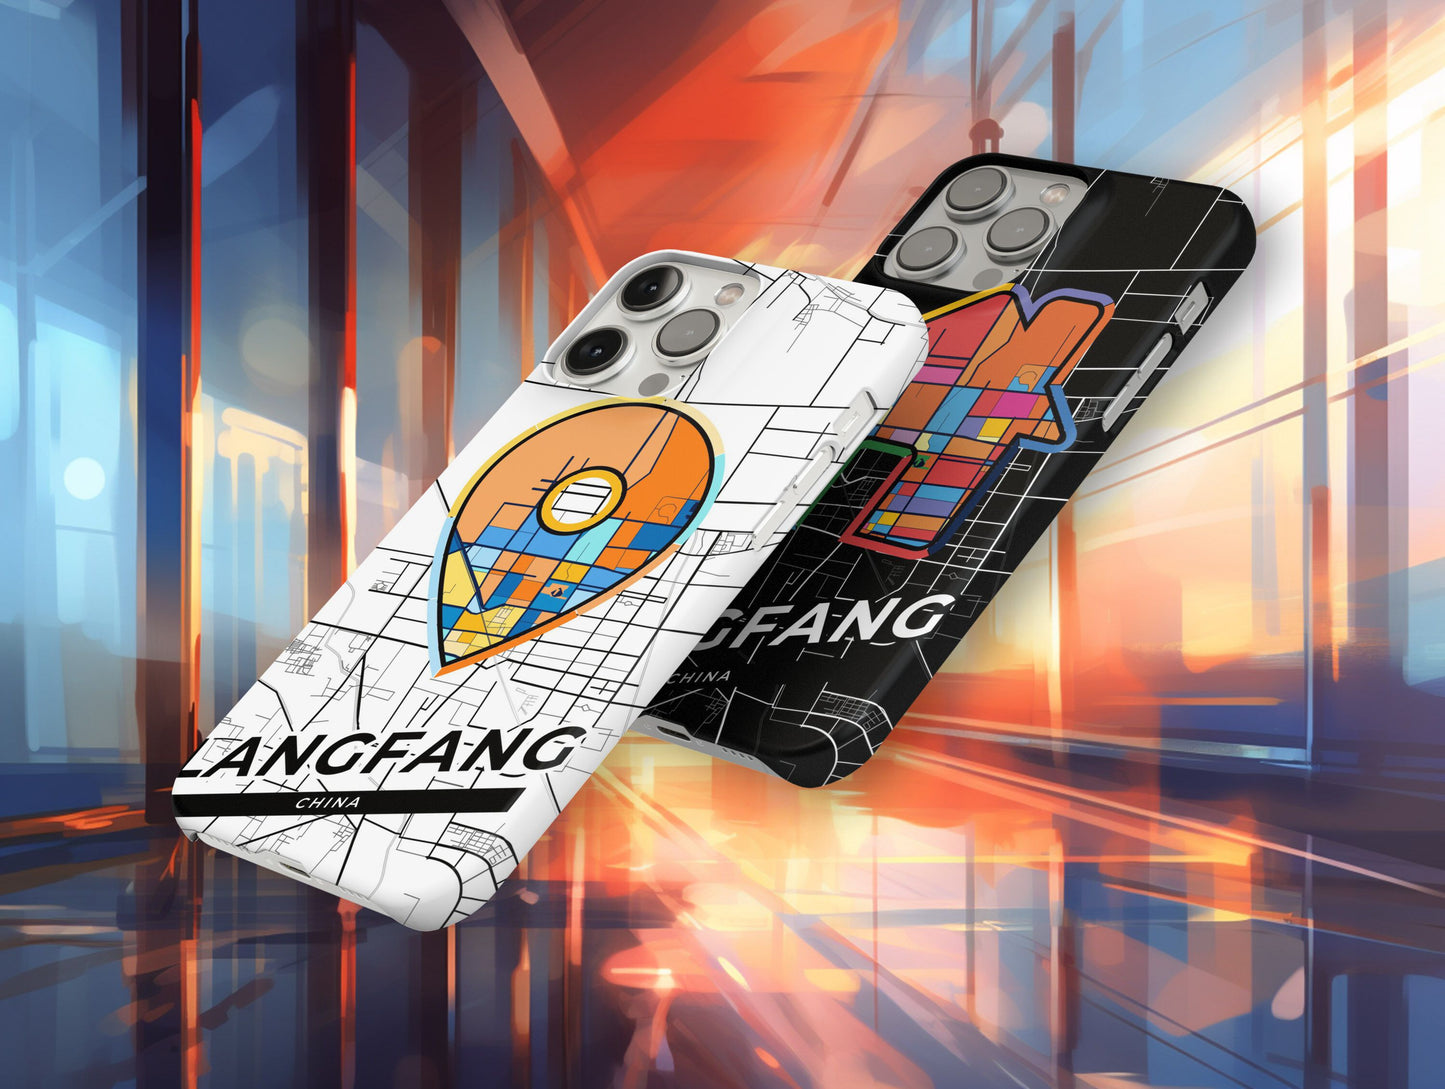 Langfang China slim phone case with colorful icon. Birthday, wedding or housewarming gift. Couple match cases.